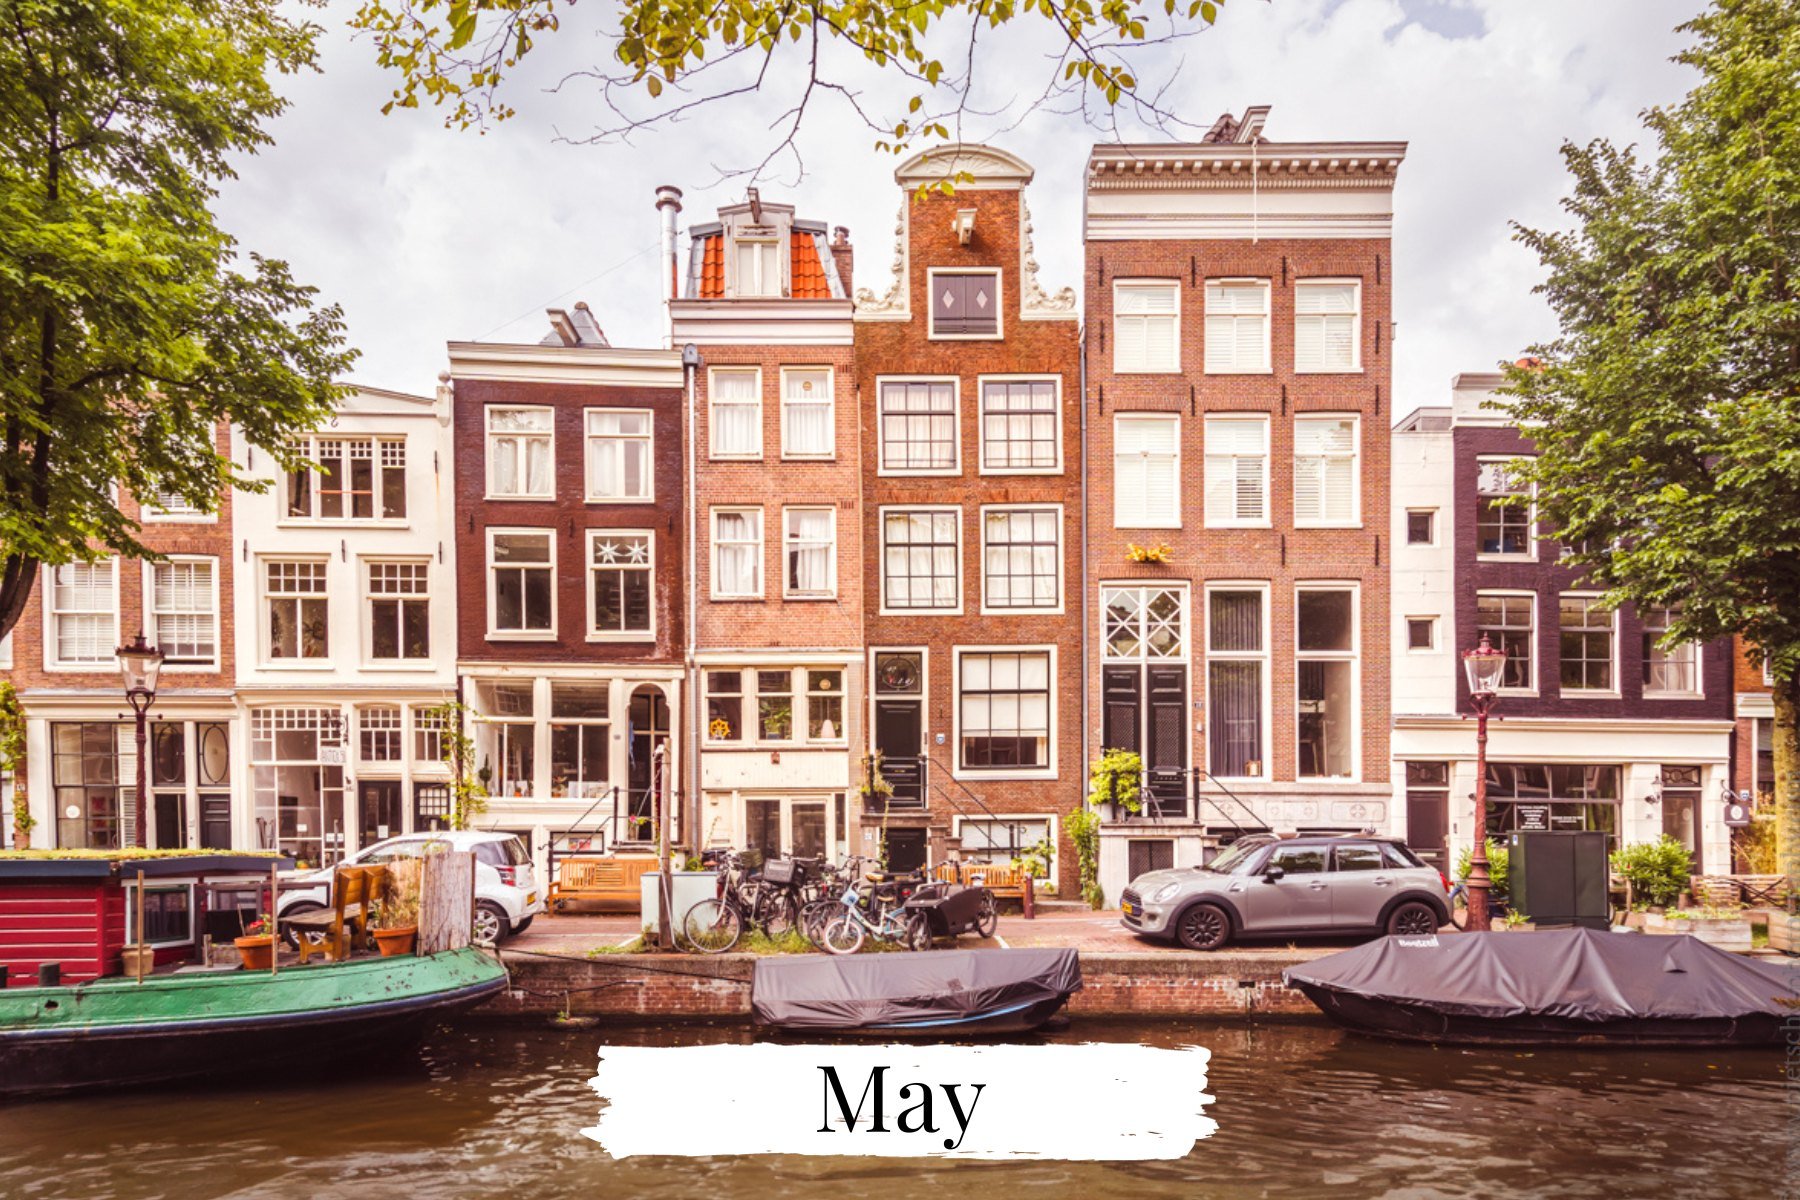 𝐇𝐞𝐥𝐥𝐨, 𝐌𝐚𝐲! 🌷 Let's dive into a new month with opportunities for creativity and photography. What exciting plans do you have for the upcoming 30 days? Share your creative journey with me! 📸 

#amsterdam #amsterdamcanal #amsterdamcanals #ams